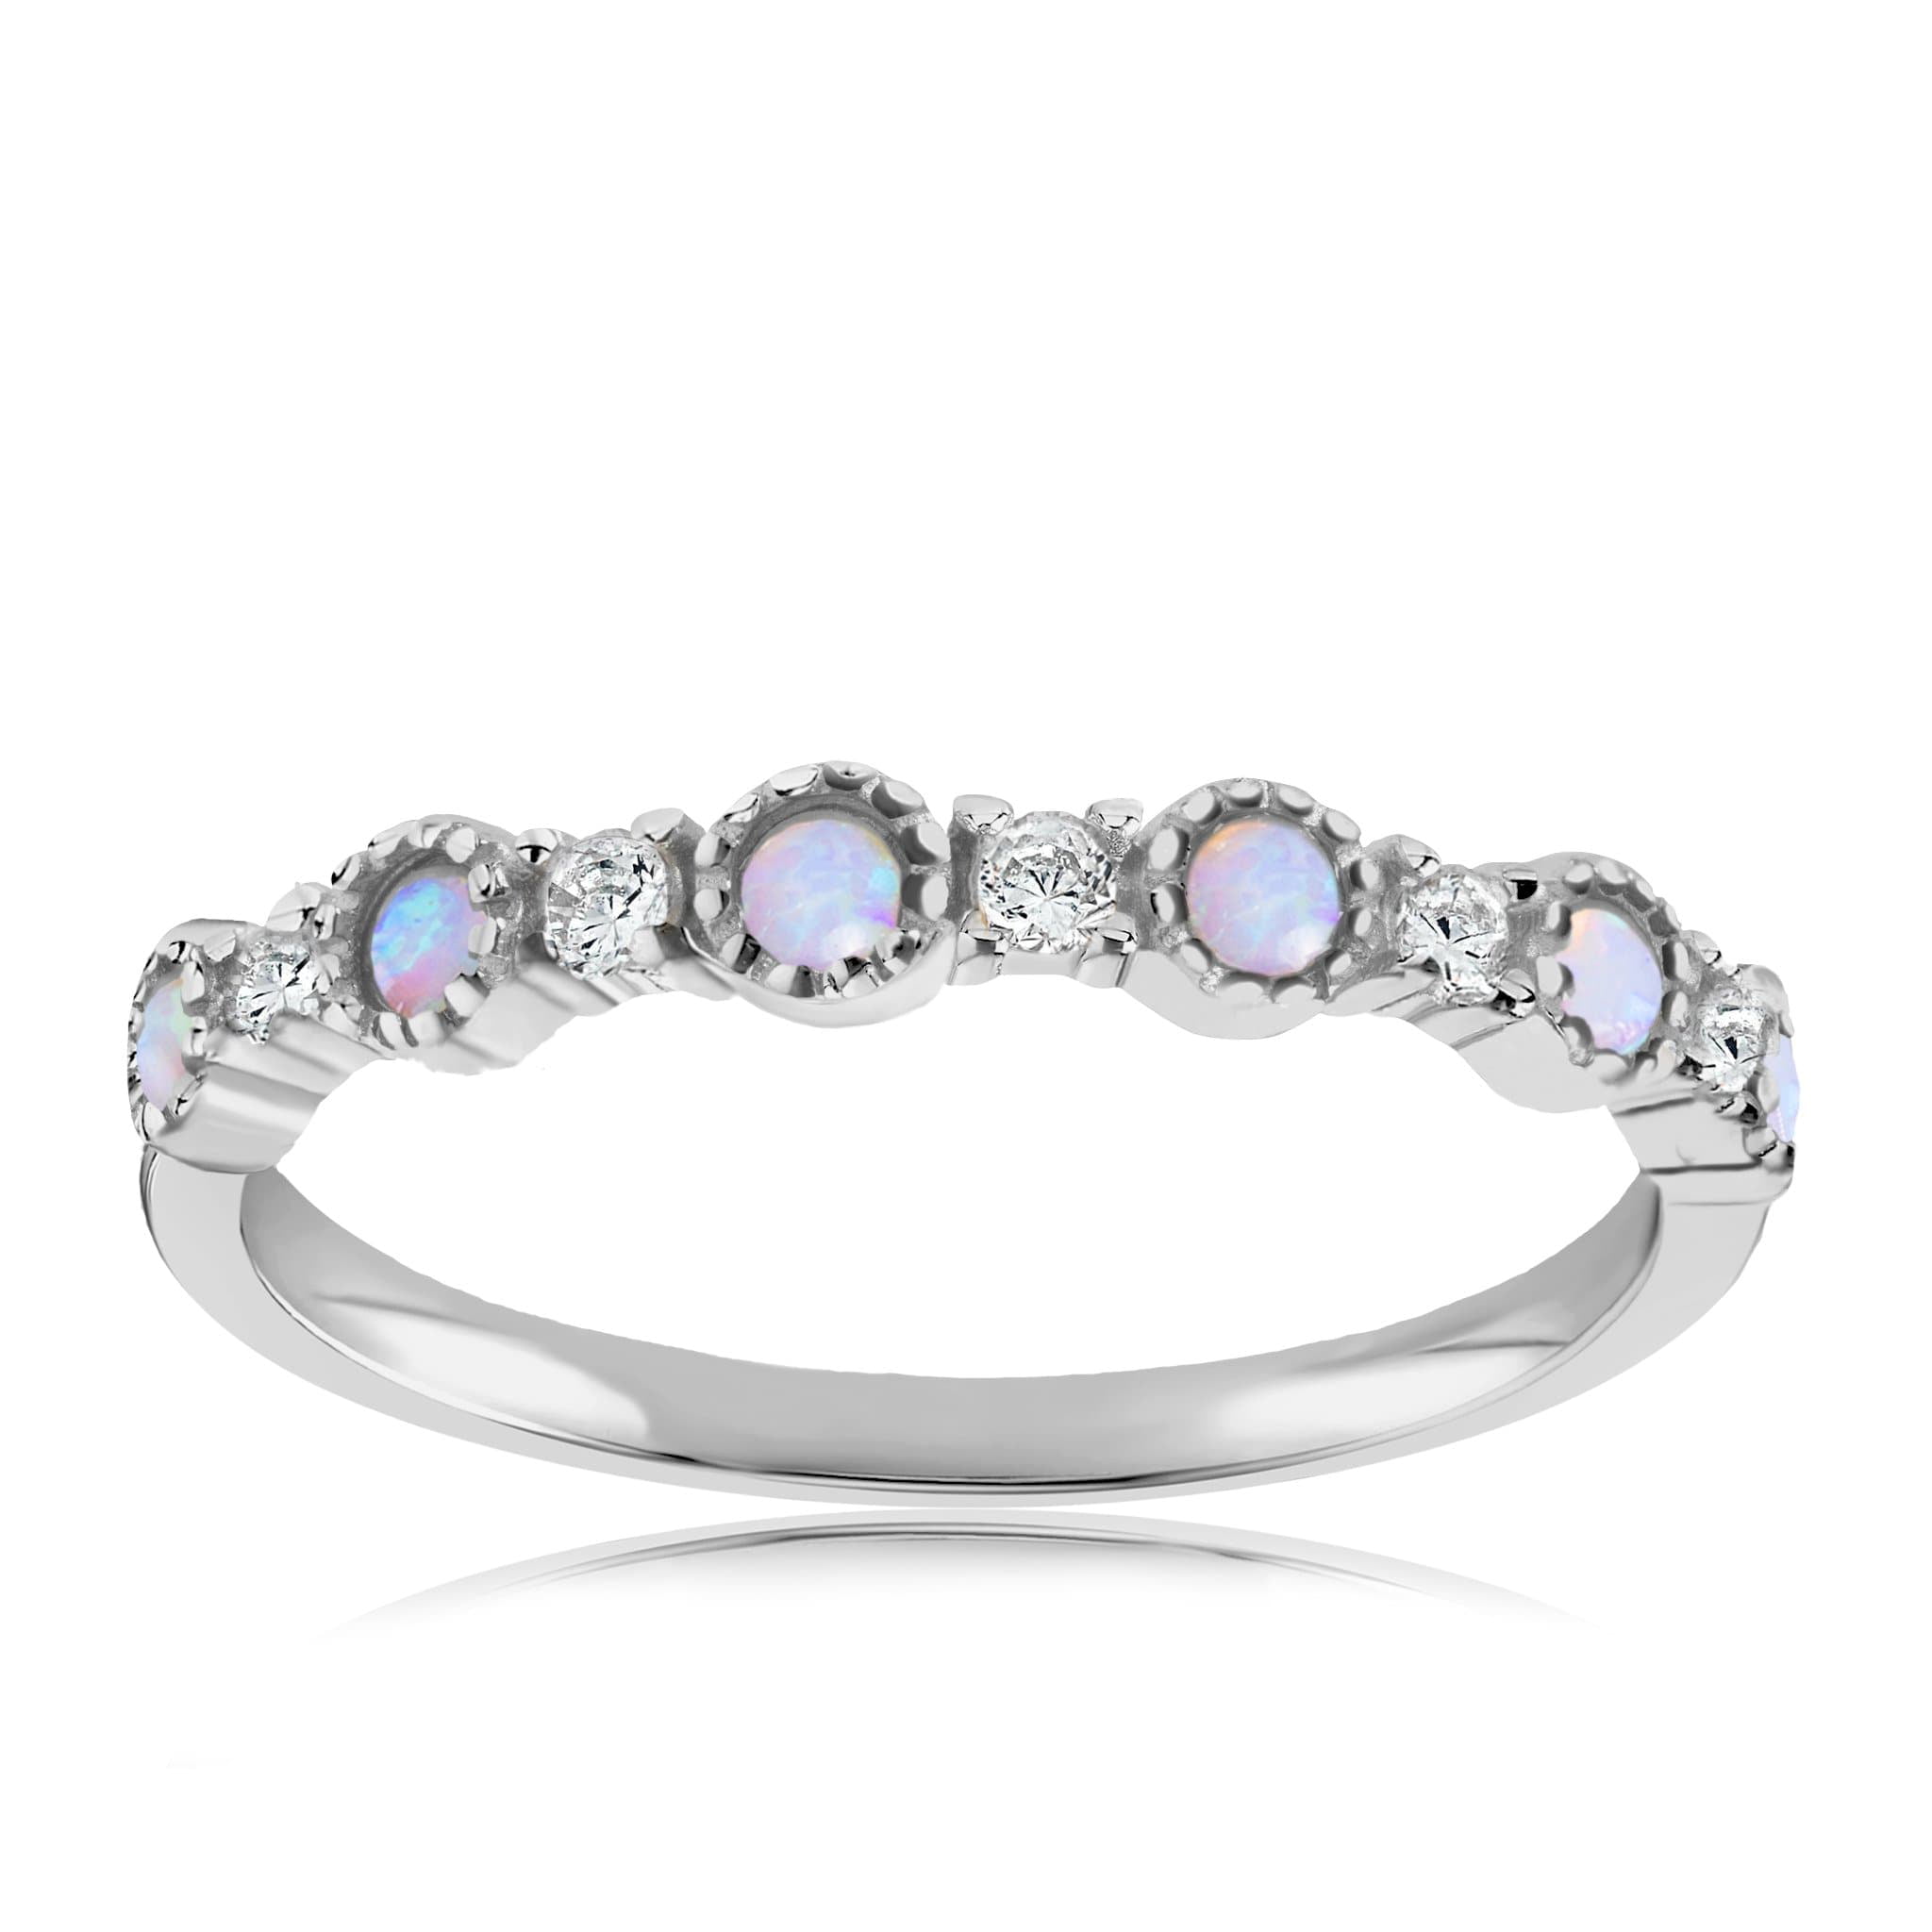 CloseoutWarehouse Round Center Flower Garden White Simulated Opal Ring 925 Sterling Silver Size 7